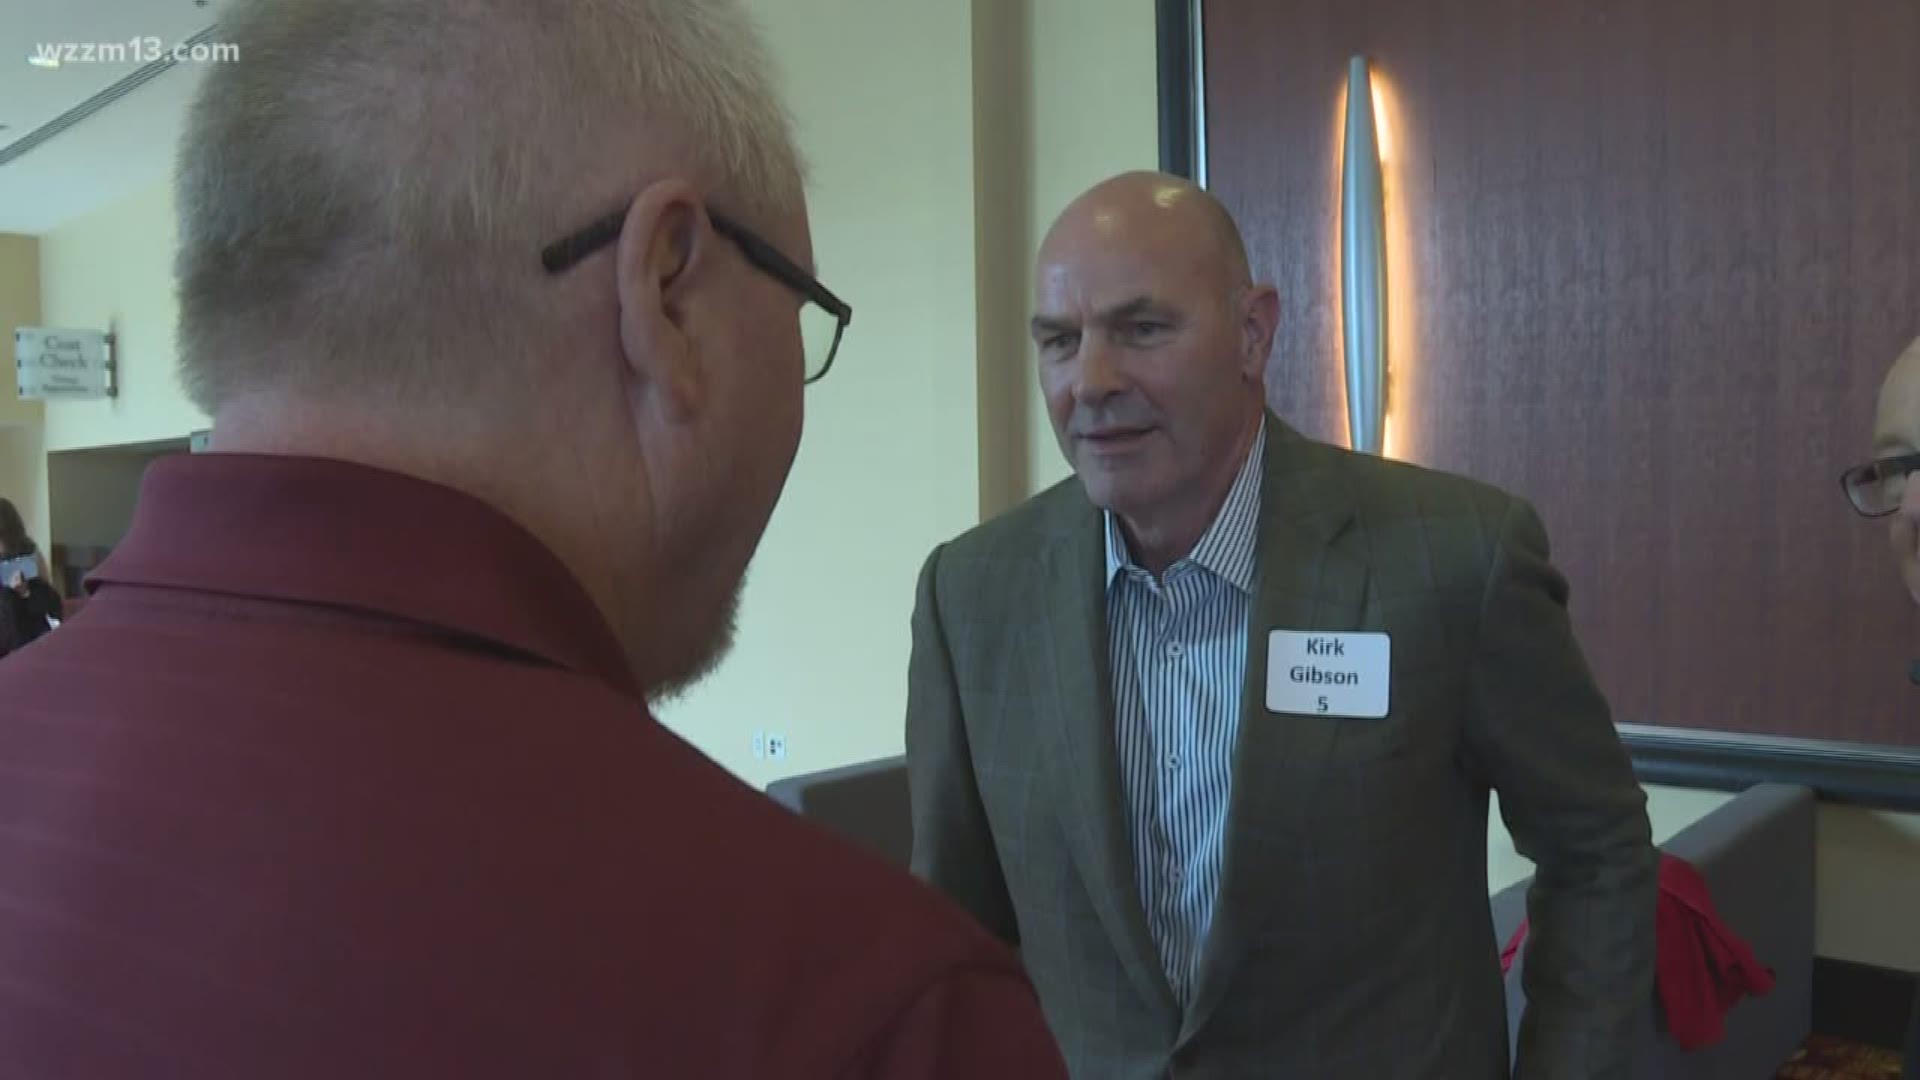 Rockford man with Parkinson's meets long-time hero Kirk Gibson